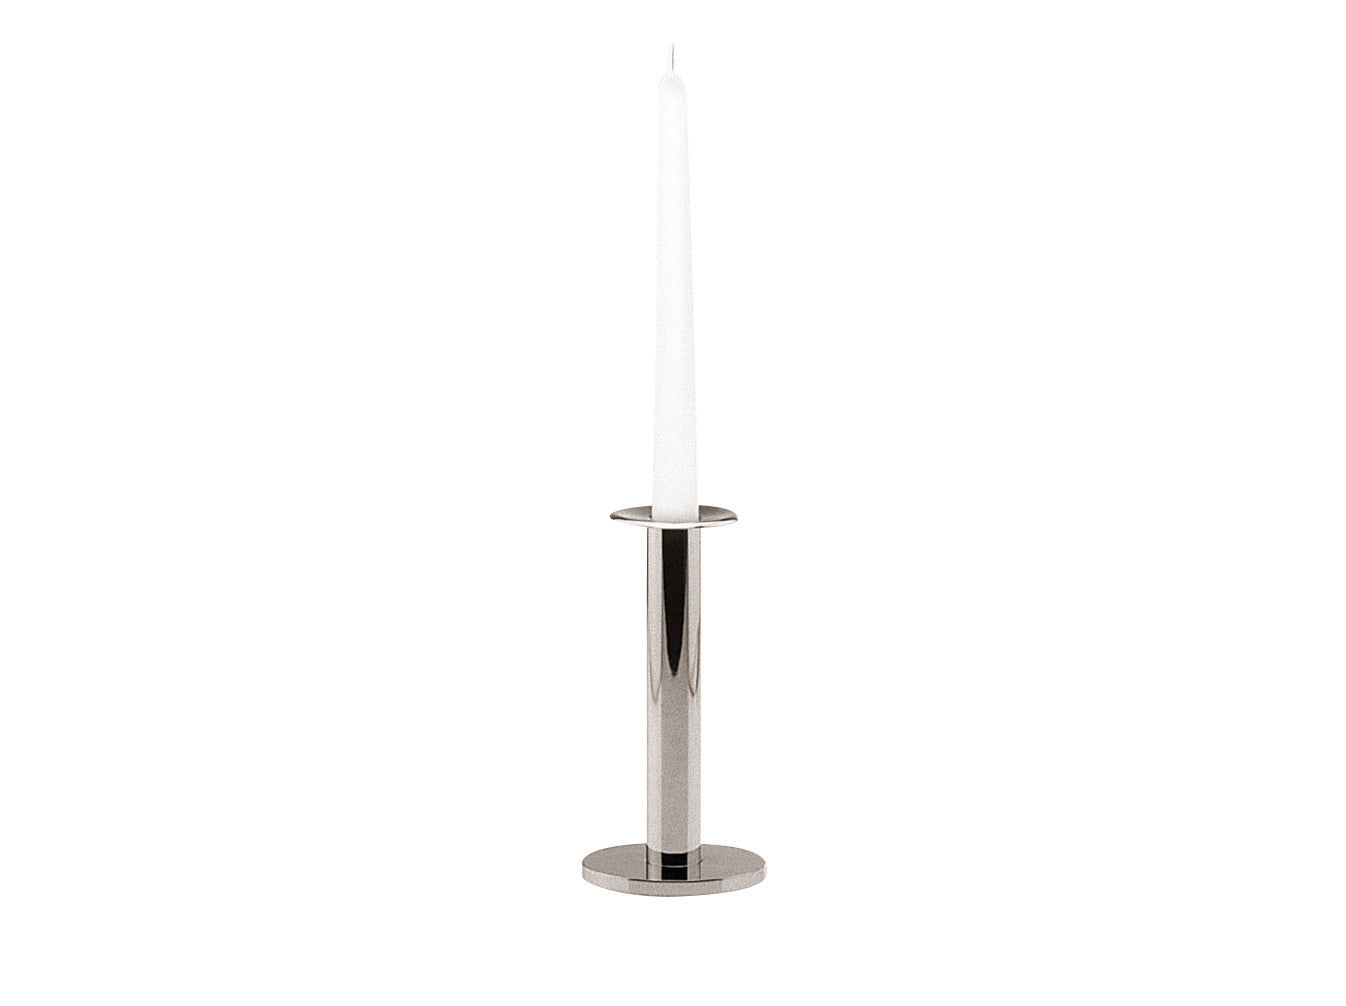 Candelabra for 1 candle, silver plated 18 cm